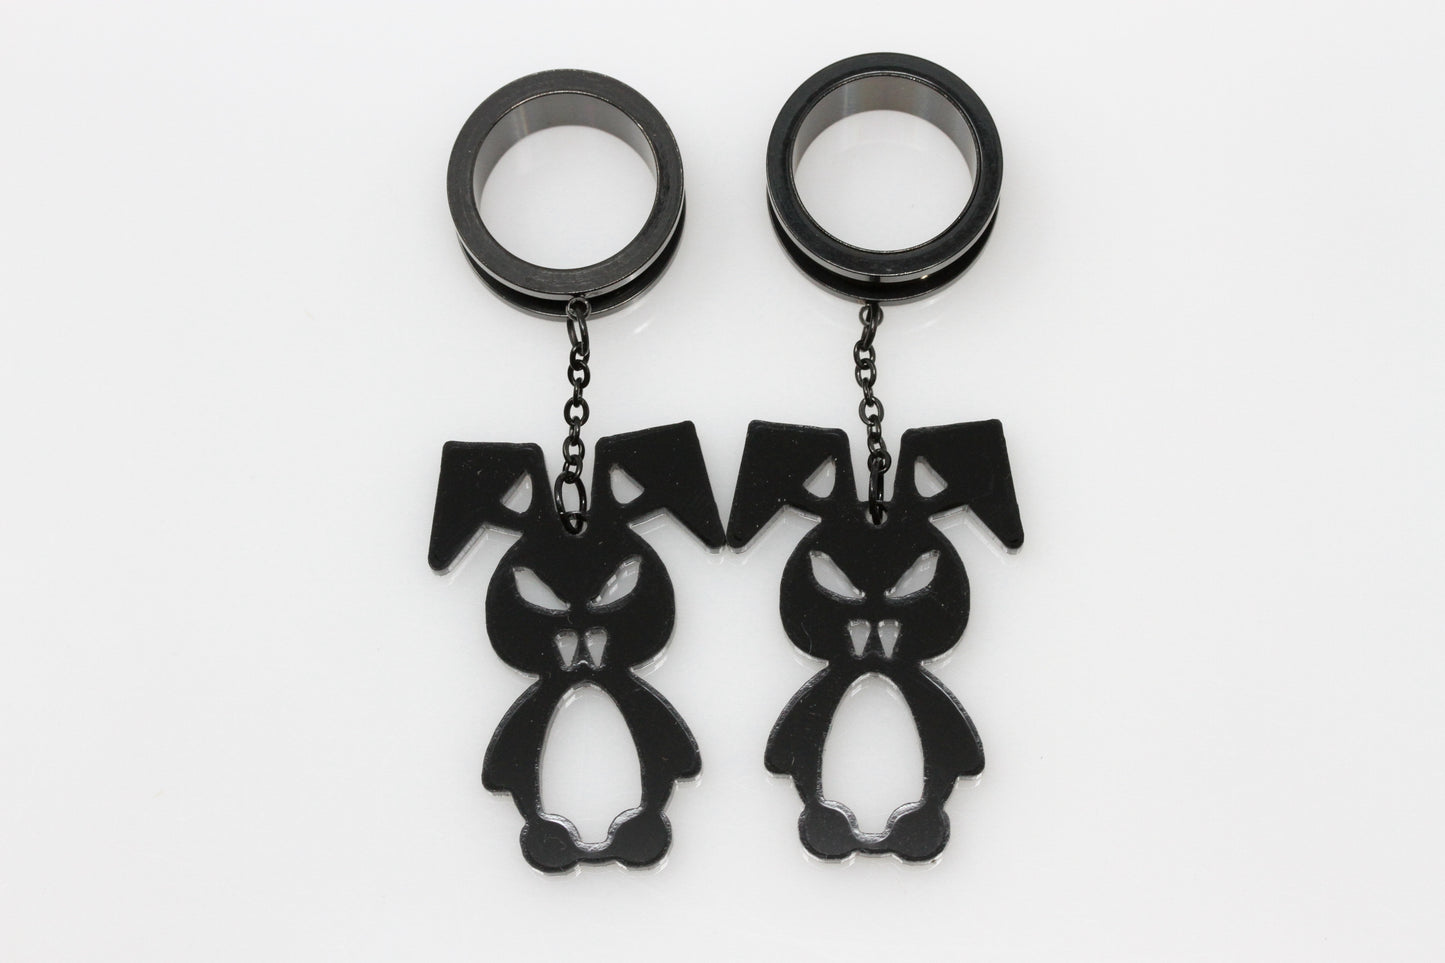 Fluffy Stainless Steel / Acrylic Danglers - Screw on Tunnel (Pair) - TF003